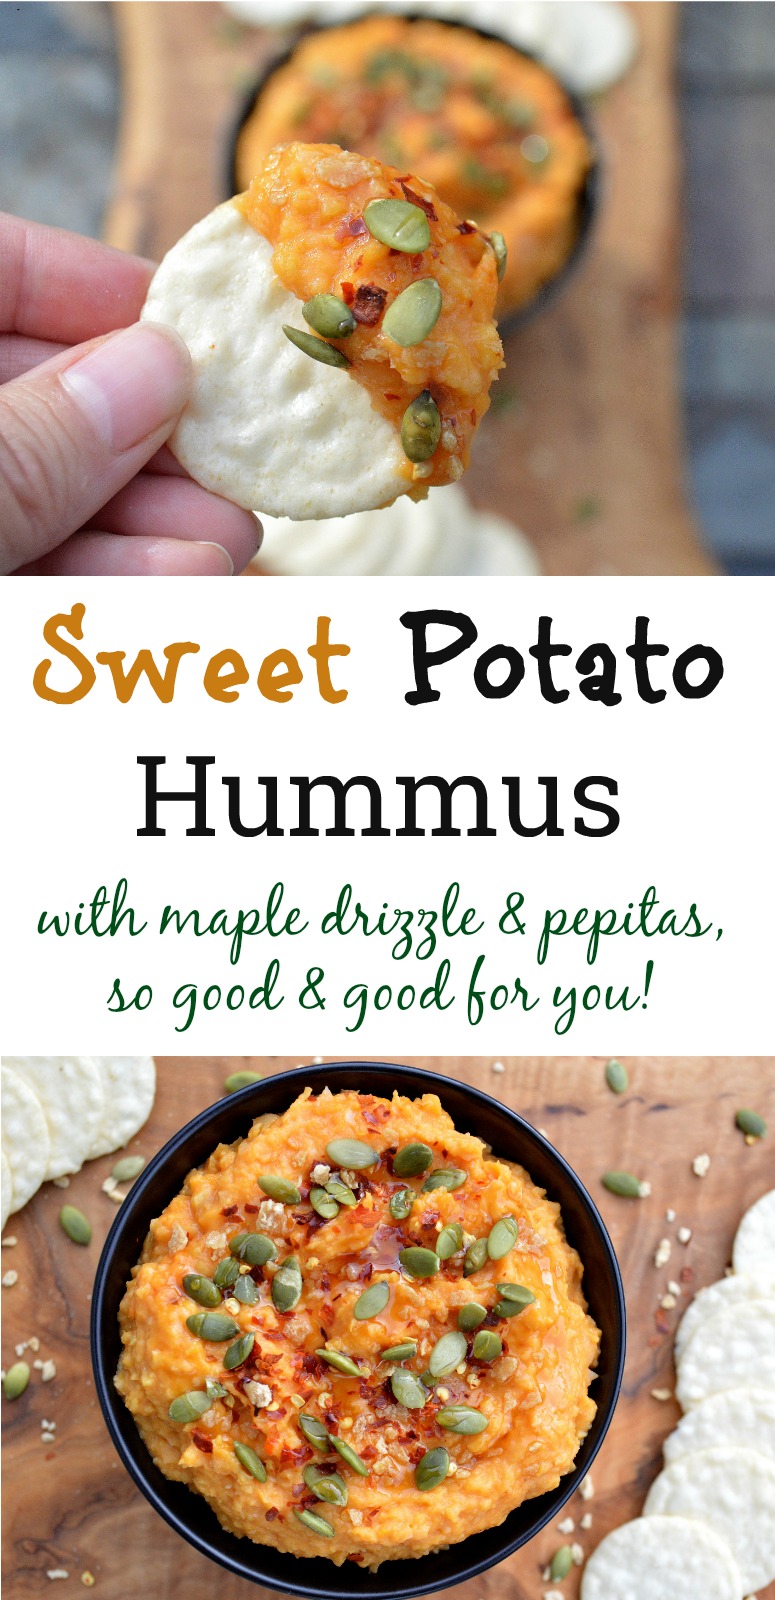 Easy & delicious Sweet Potato Hummus with pepitas and a maple drizzle. So good & good for you!